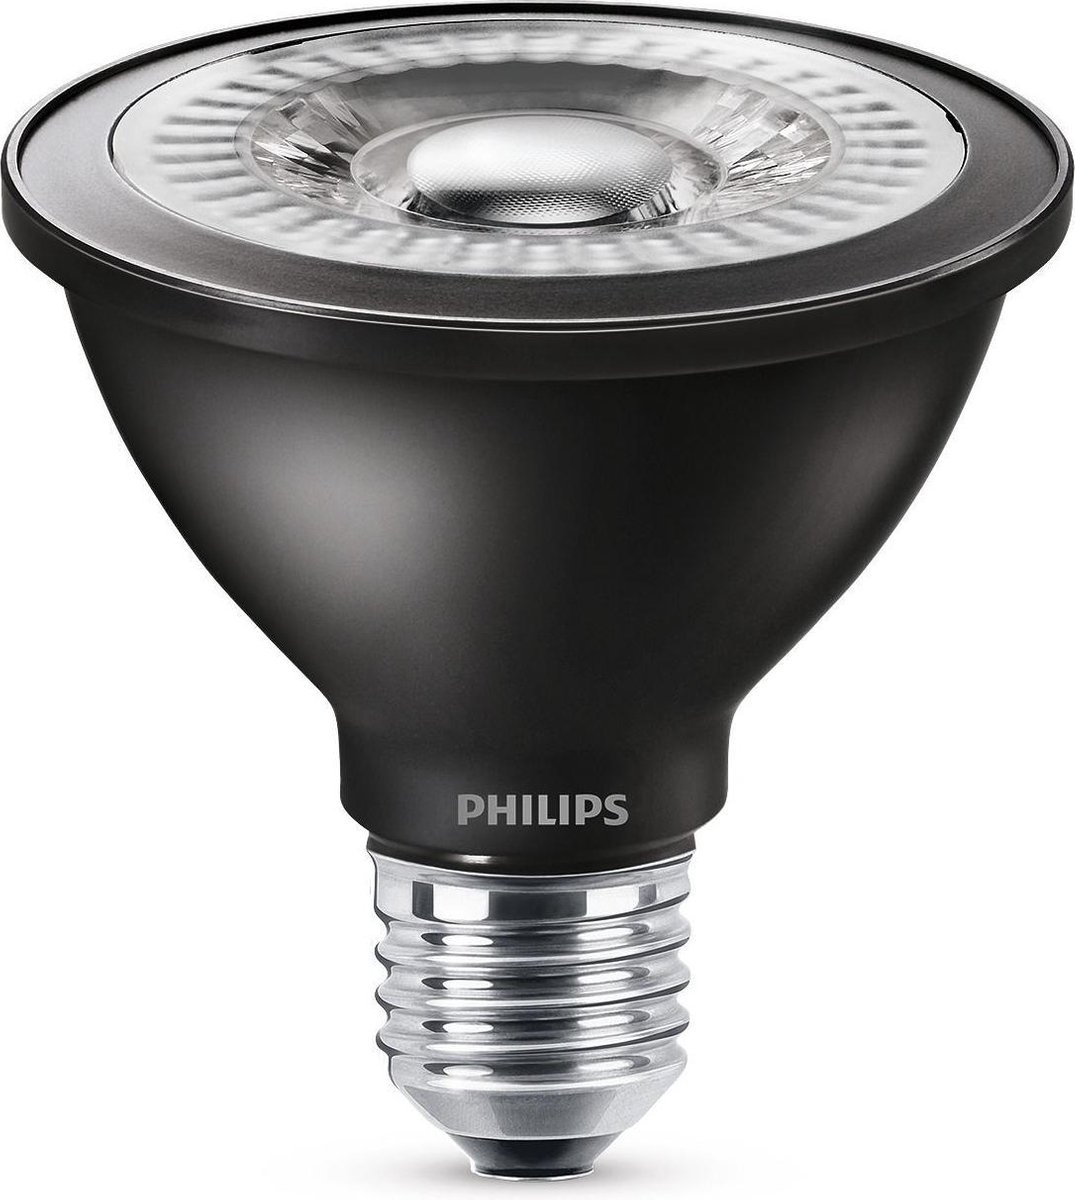 Keer terug als blootstelling Philips MASTER LED PAR30S 8,5W (75W) E27 (grote fitting) Extra Warm Wit met  Reflector... | bol.com